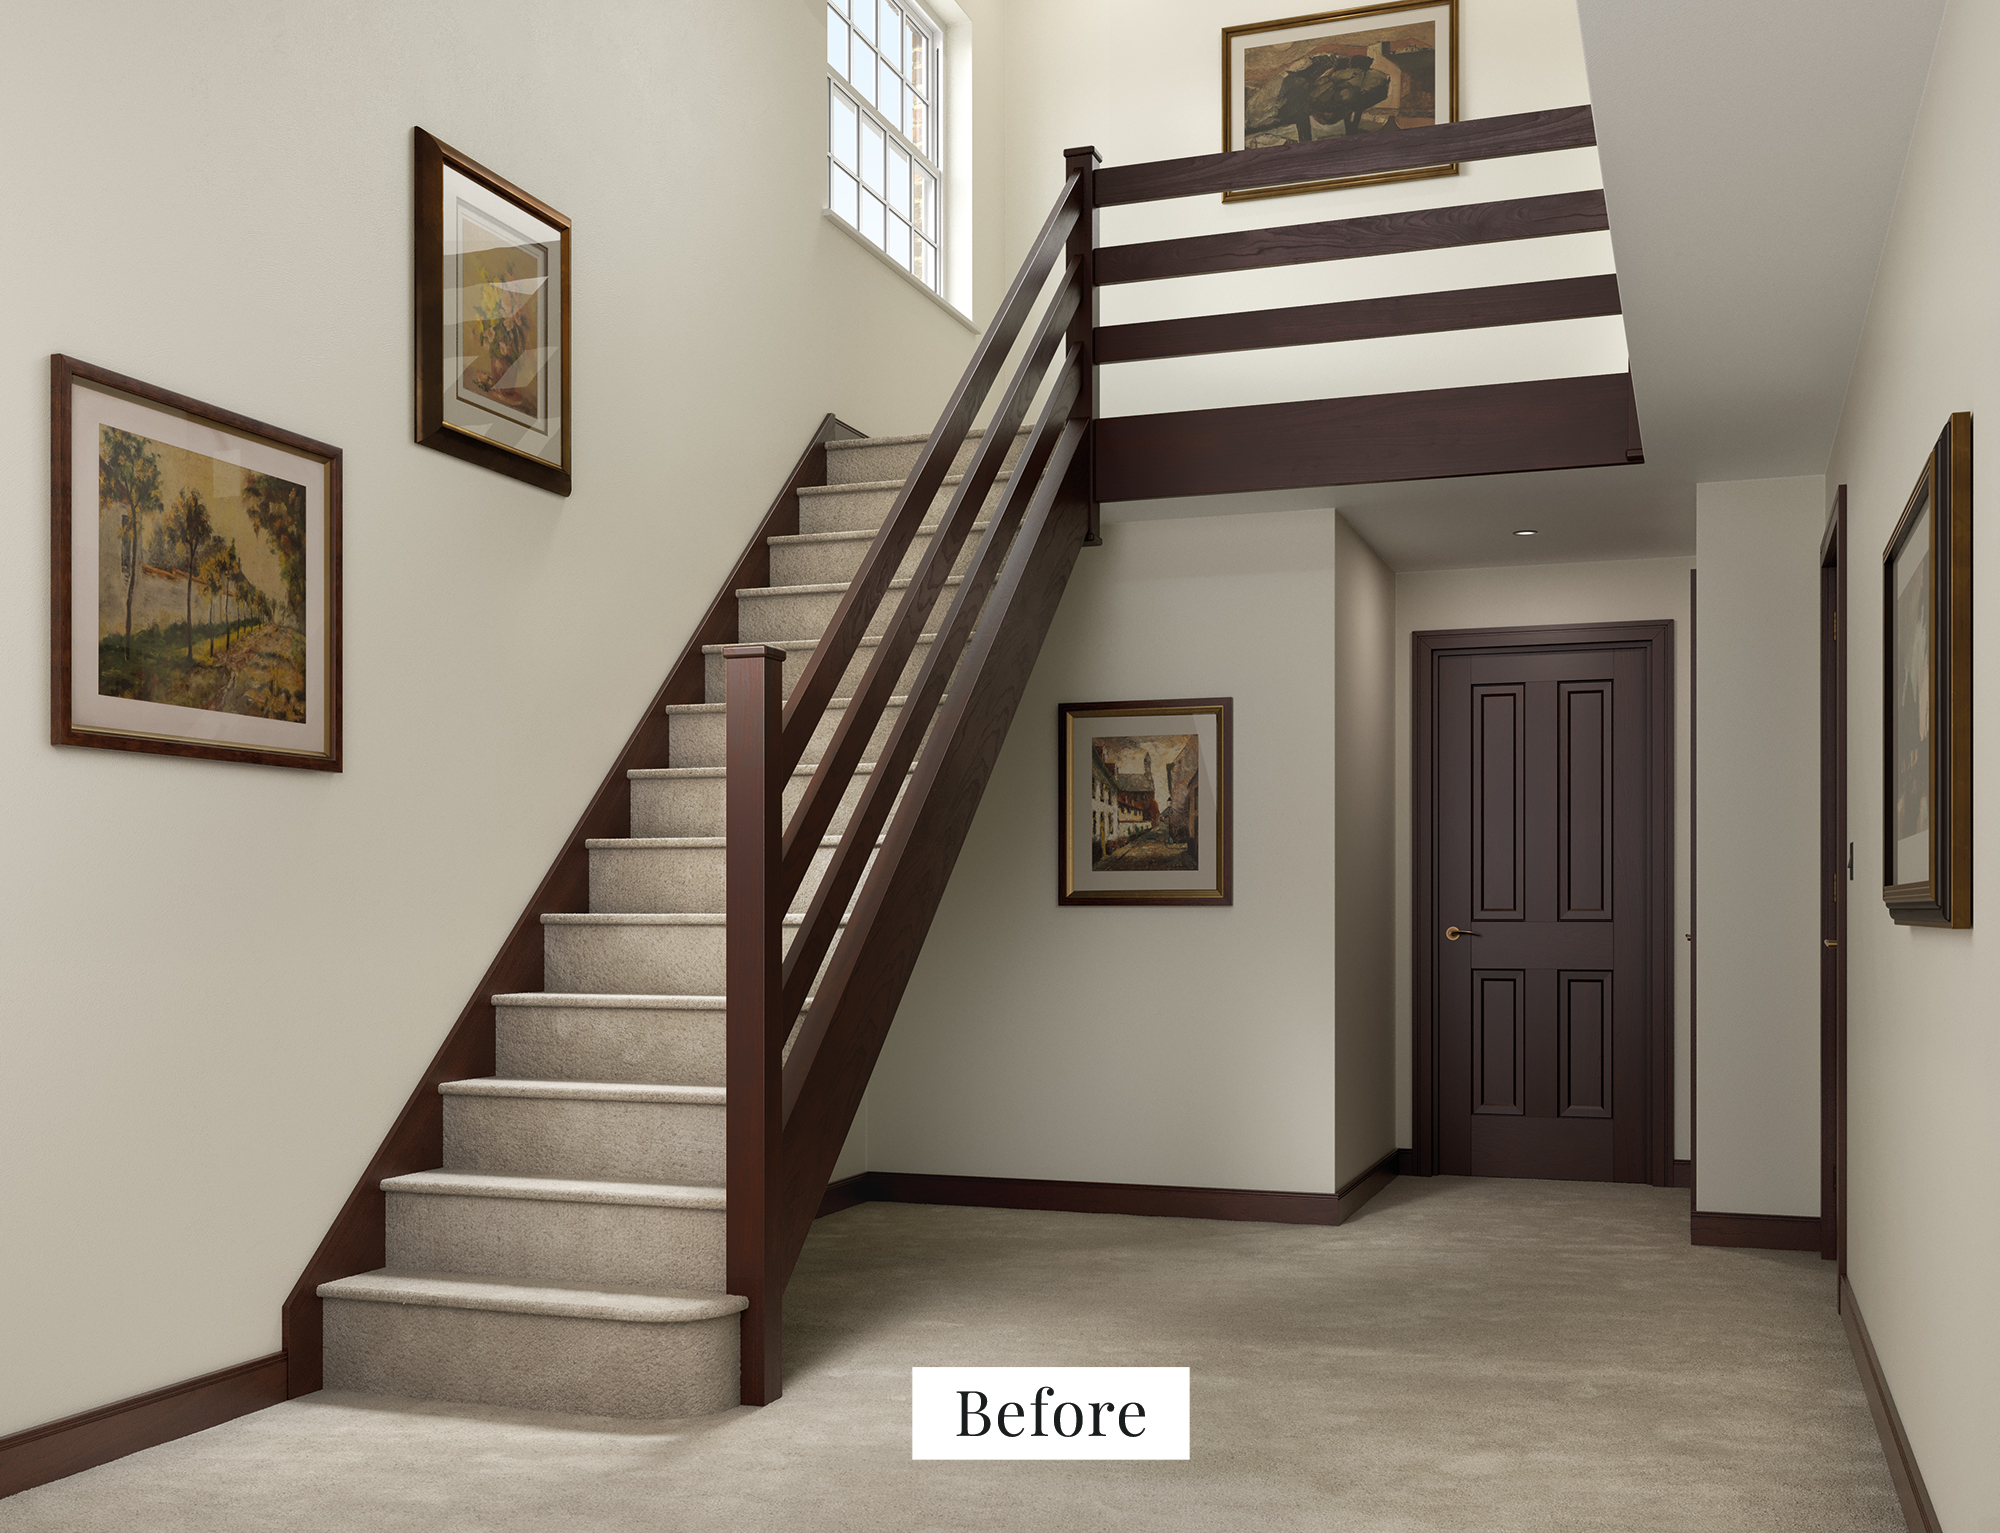 After Image of Furniture and Staircases